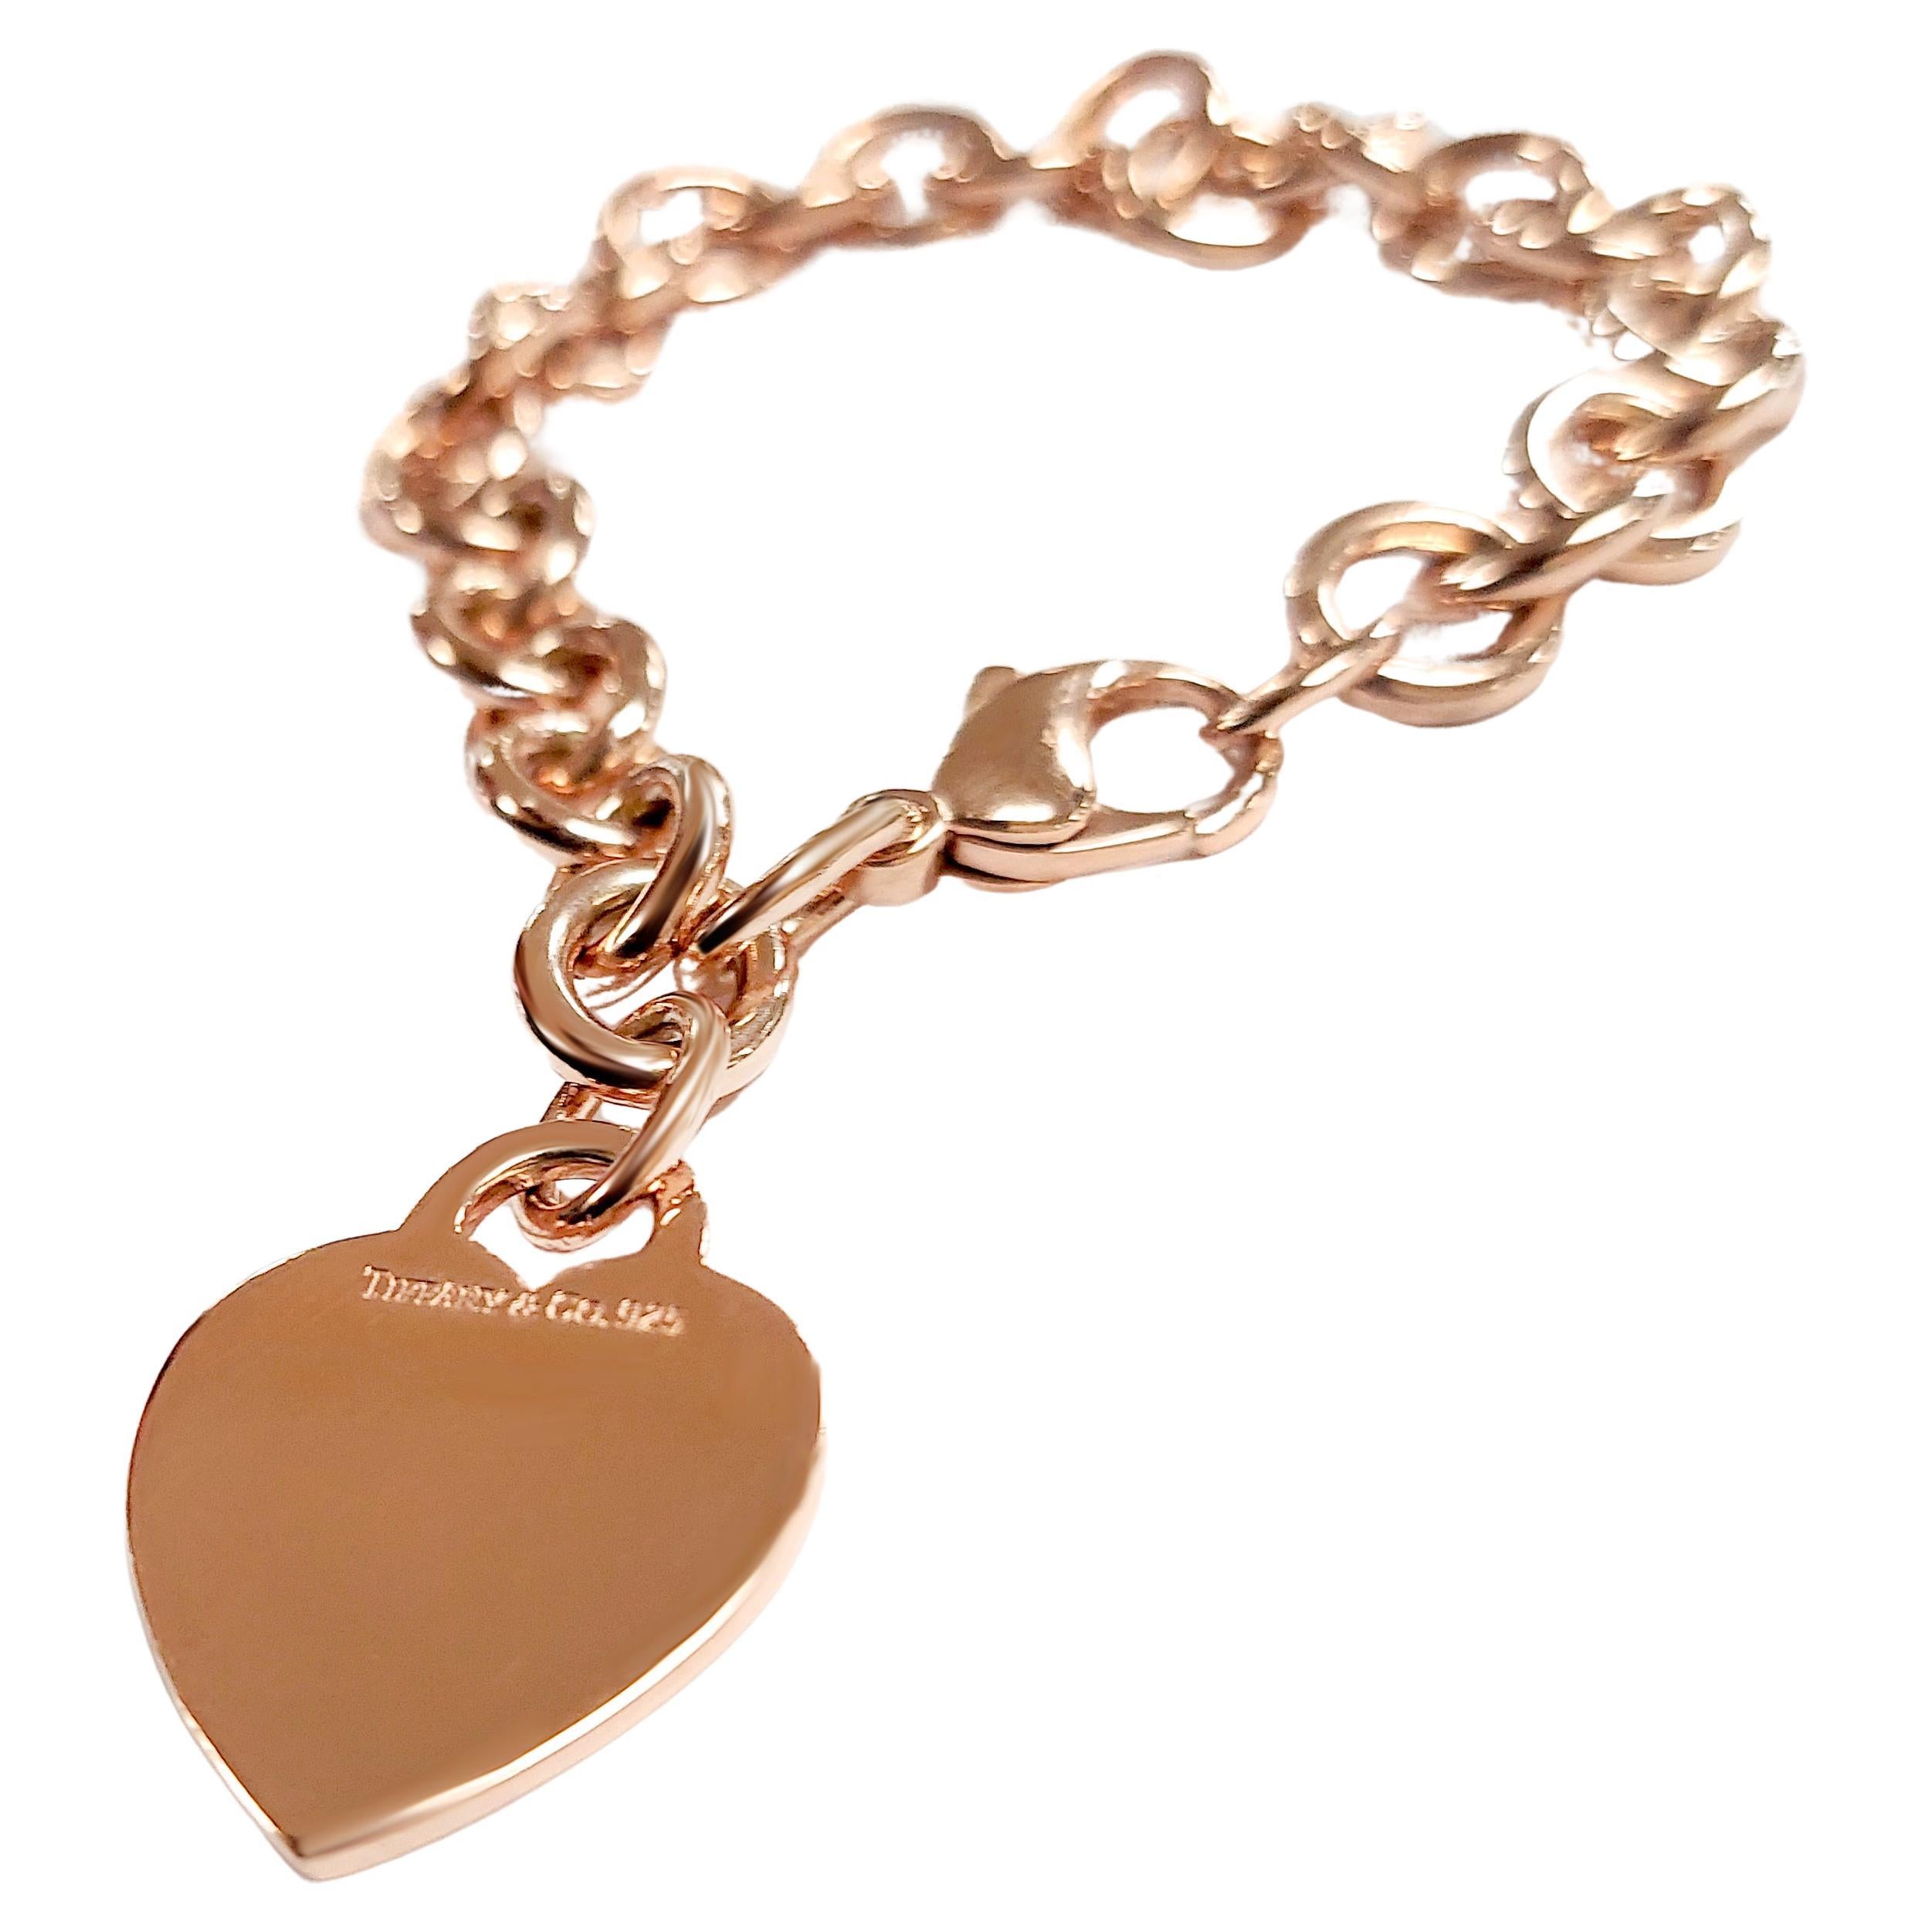 Tiffany & Co. 925 Silver Heart Charm Rose Gold Plated Bracelet